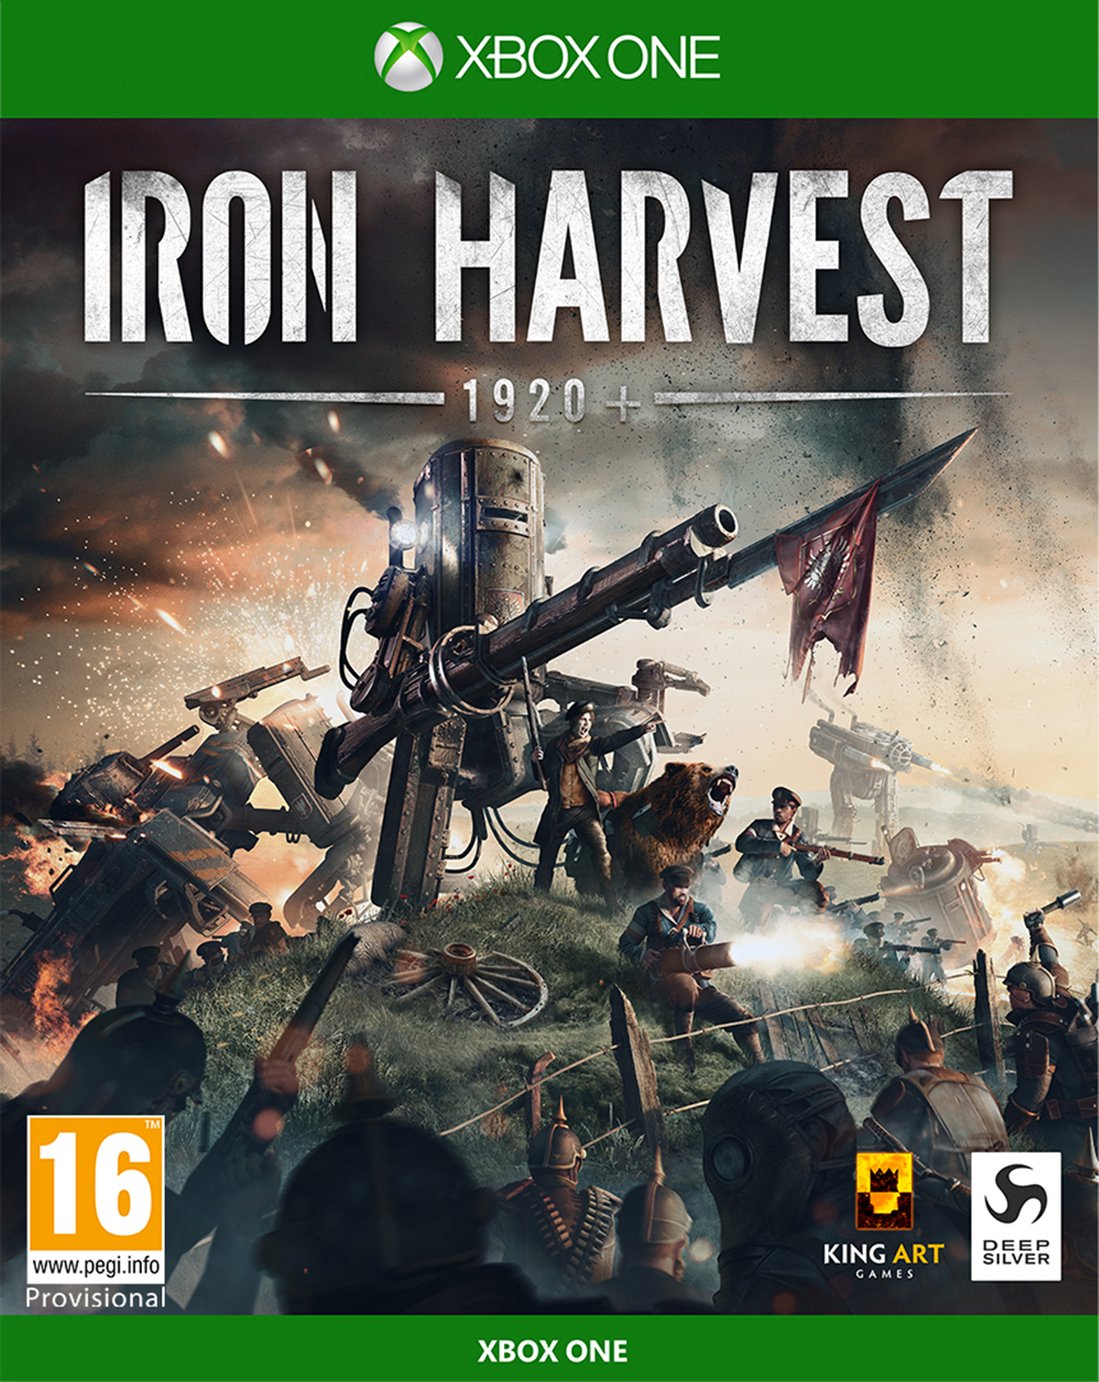 Iron Harvest Xbox One Game Pre-Order Review